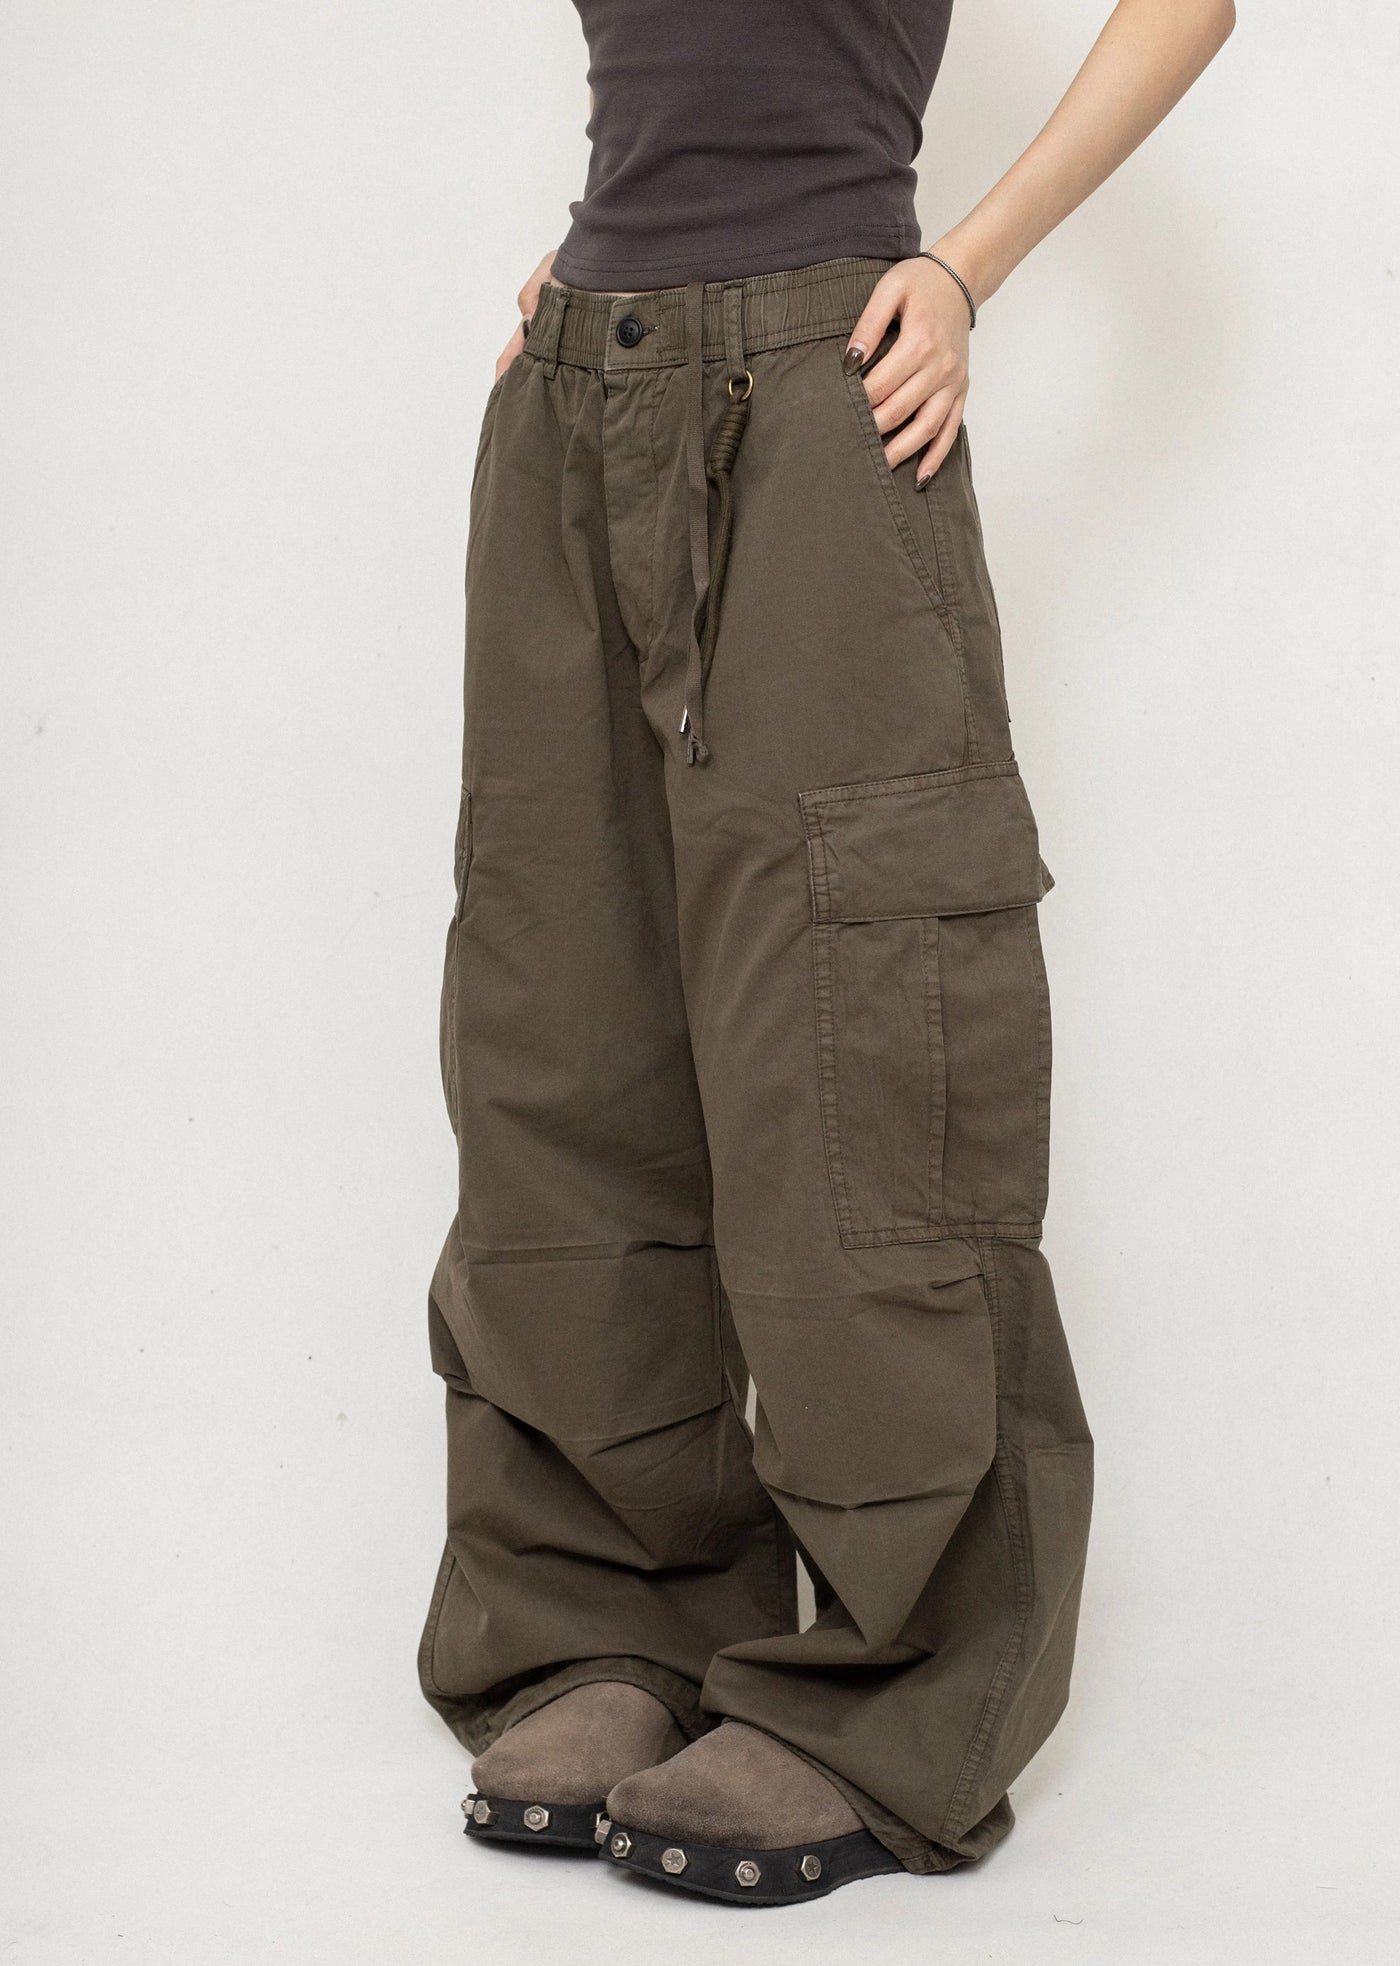 【ZERO STORE】Wide tuck silhouette dull color pants  ZS0029